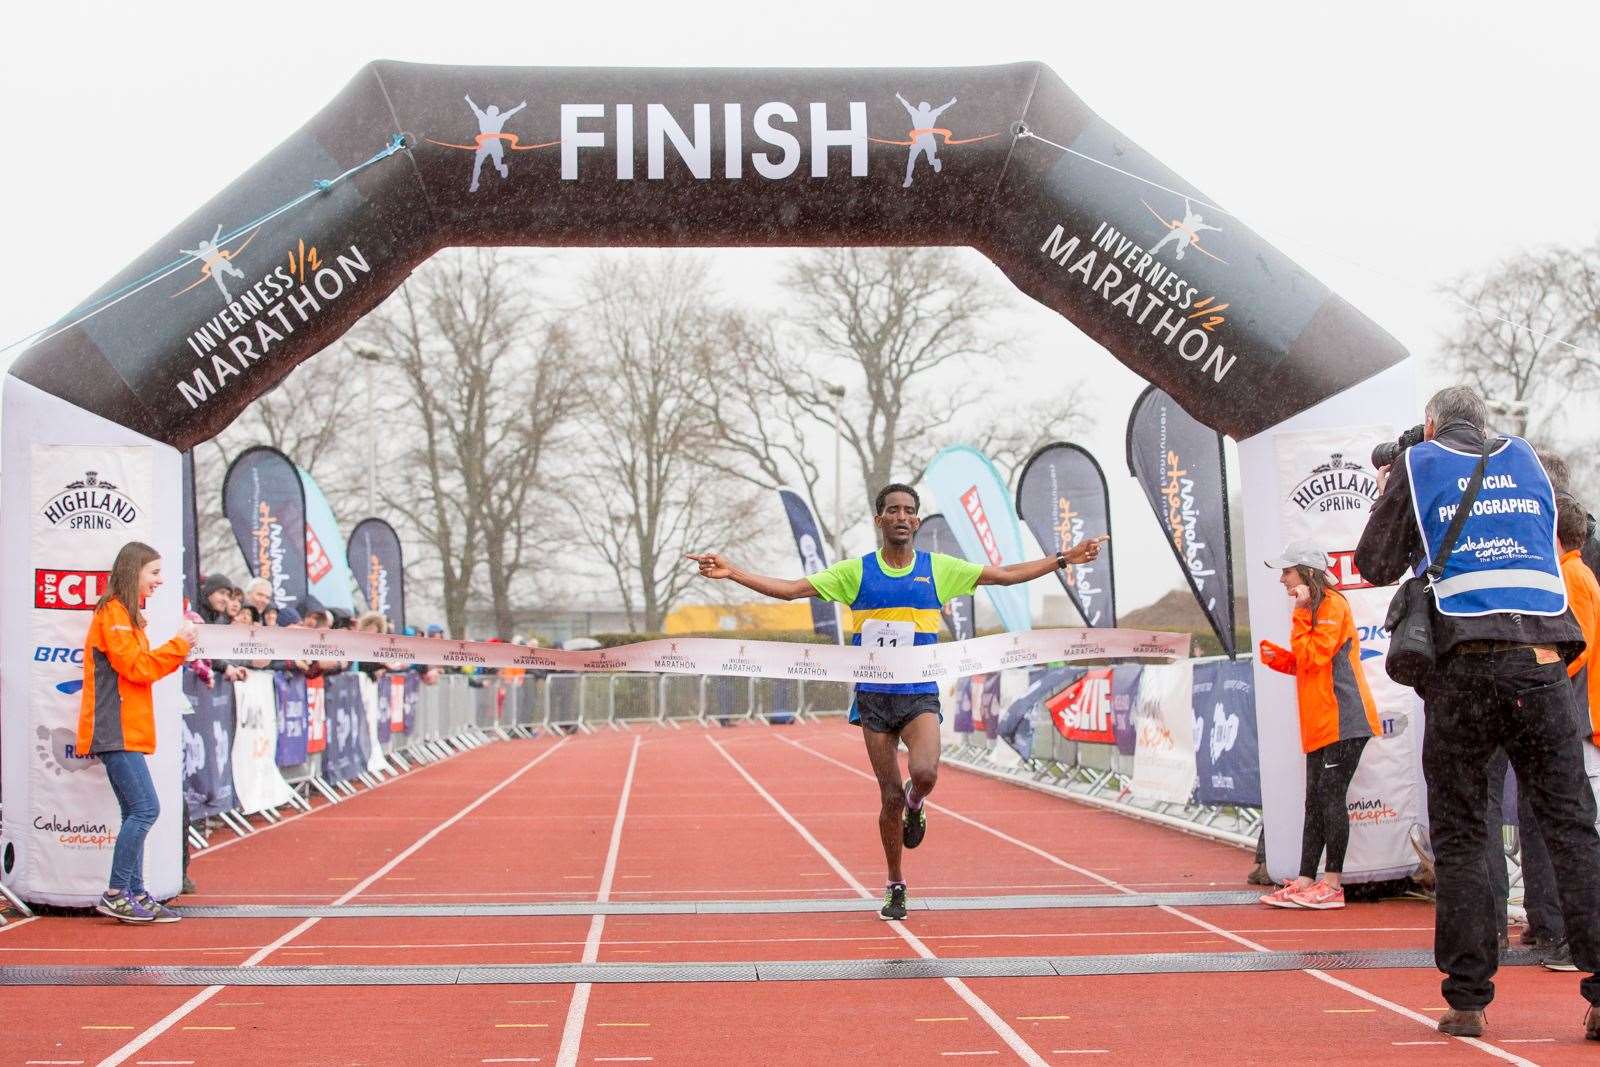 Winner of the Inverness Half Marathon, Netnay Ghebresilasie in a time of 1:06:48.